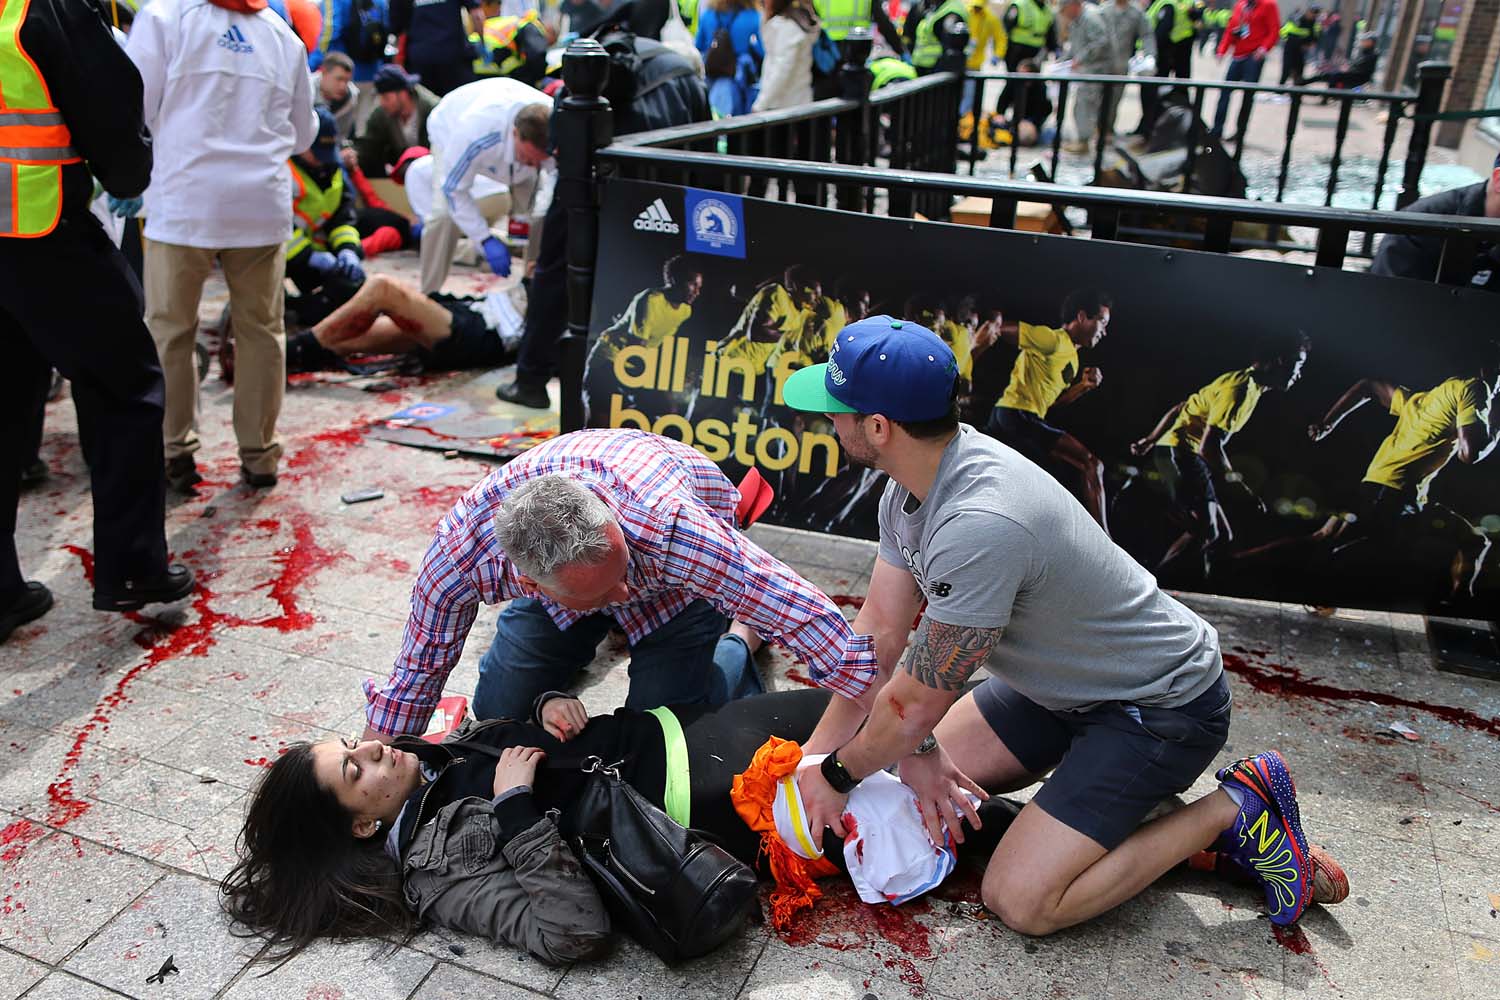 April 15, 2013. Bystanders help an injured woman at the scene of the first explosion on Boylston Street near the finish line of the 117th Boston Marathon.